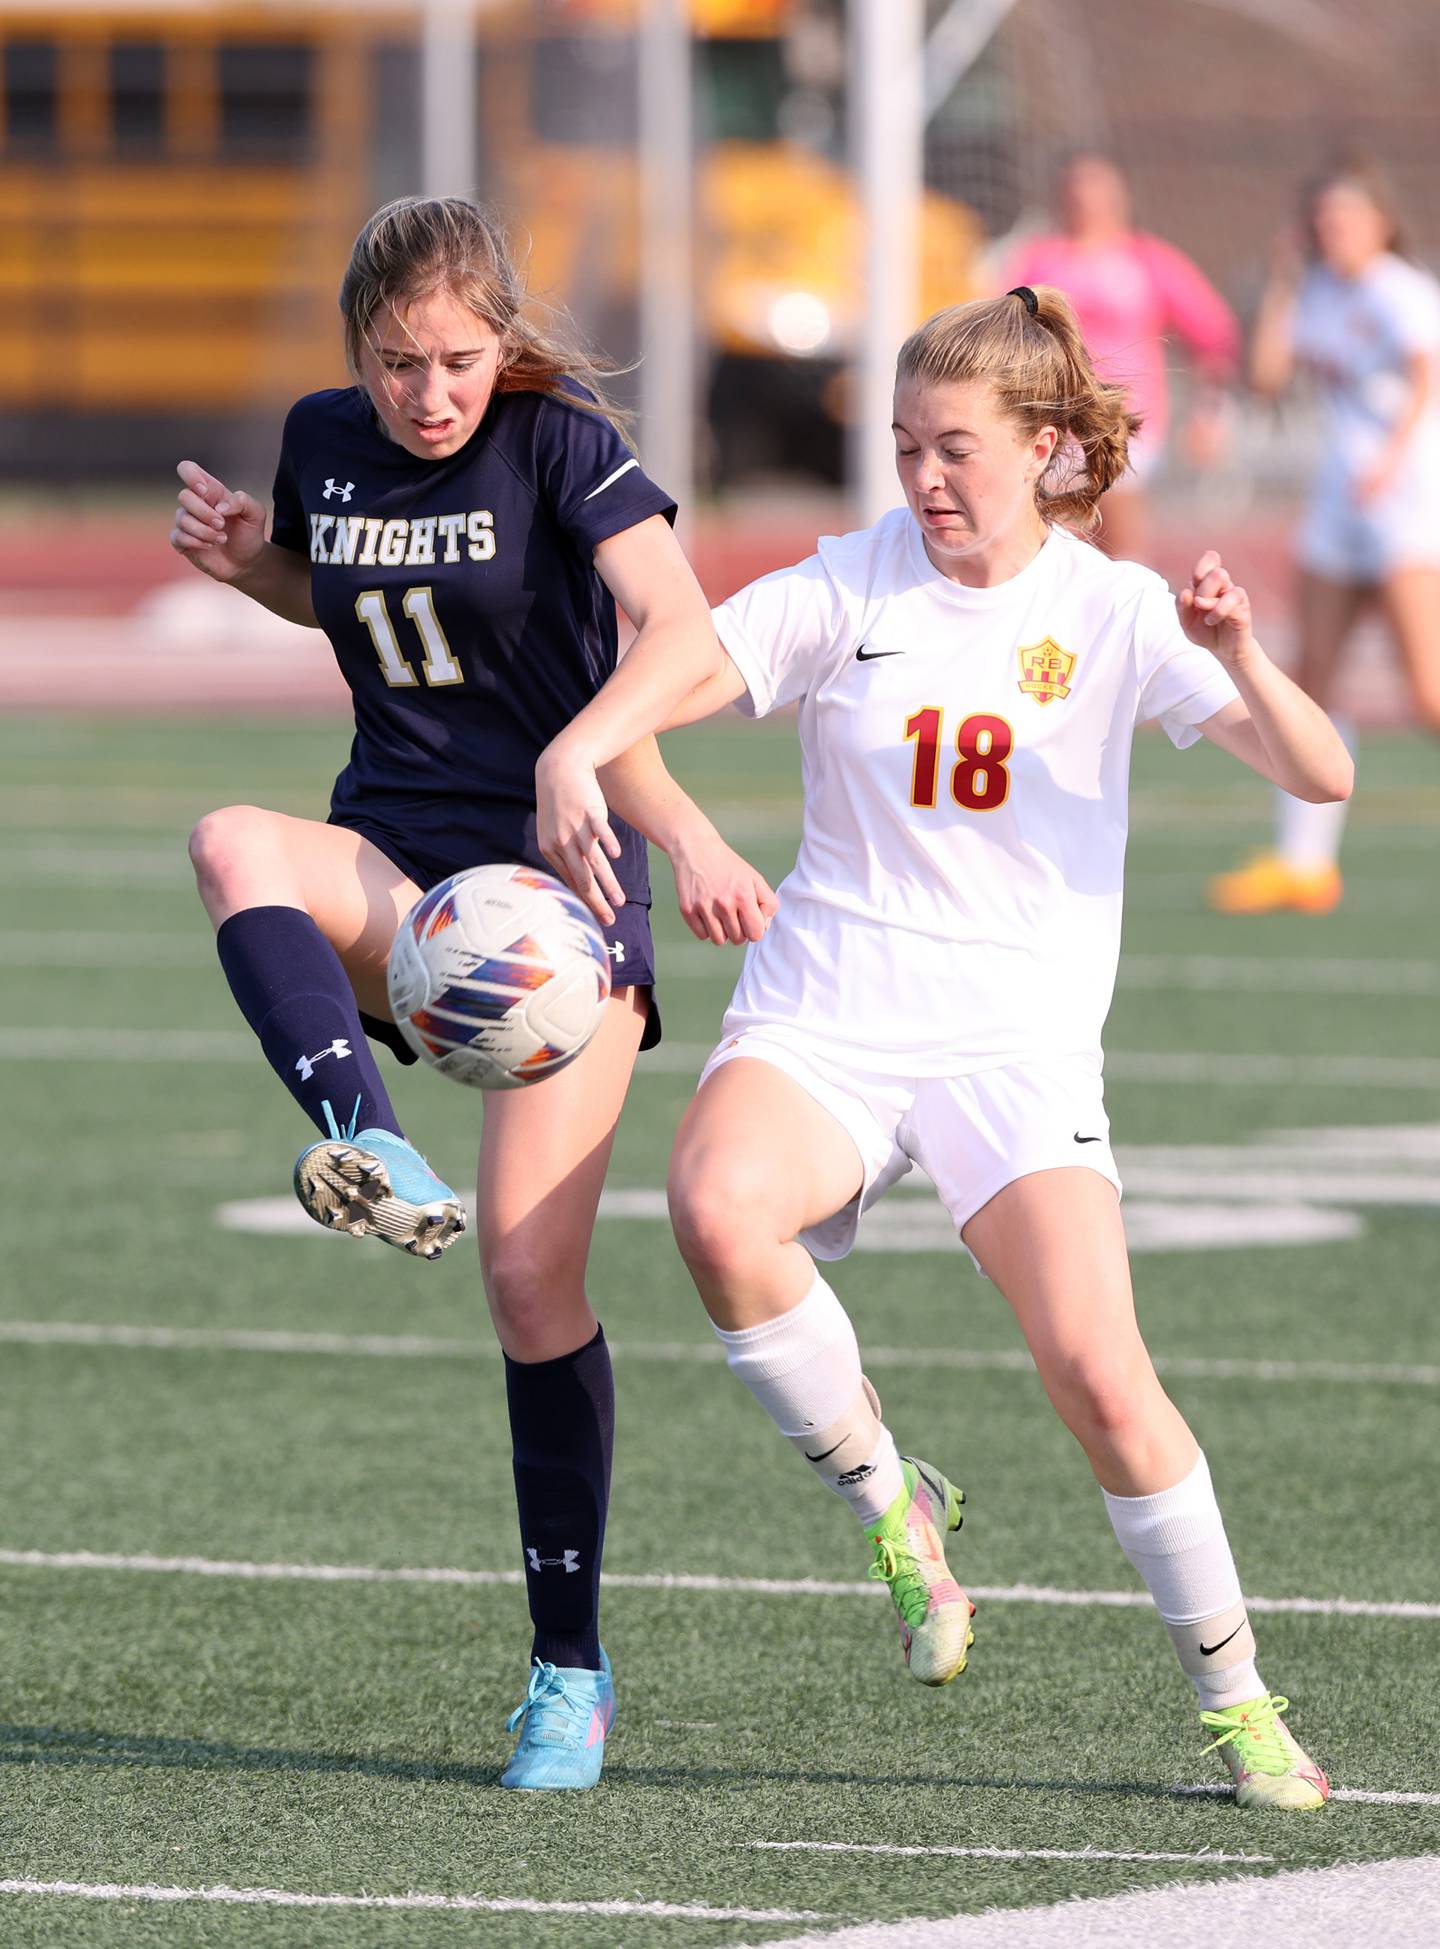 Richmond-Burton's Rachel Mendlik (18) and IC Catholic's Alysa Lawton (11) fight for the ball during the IHSA Class 1A girls soccer super-sectional match between Richmond-Burton and IC Catholic at Concordia University in River Forest on Tuesday, May 23, 2023.